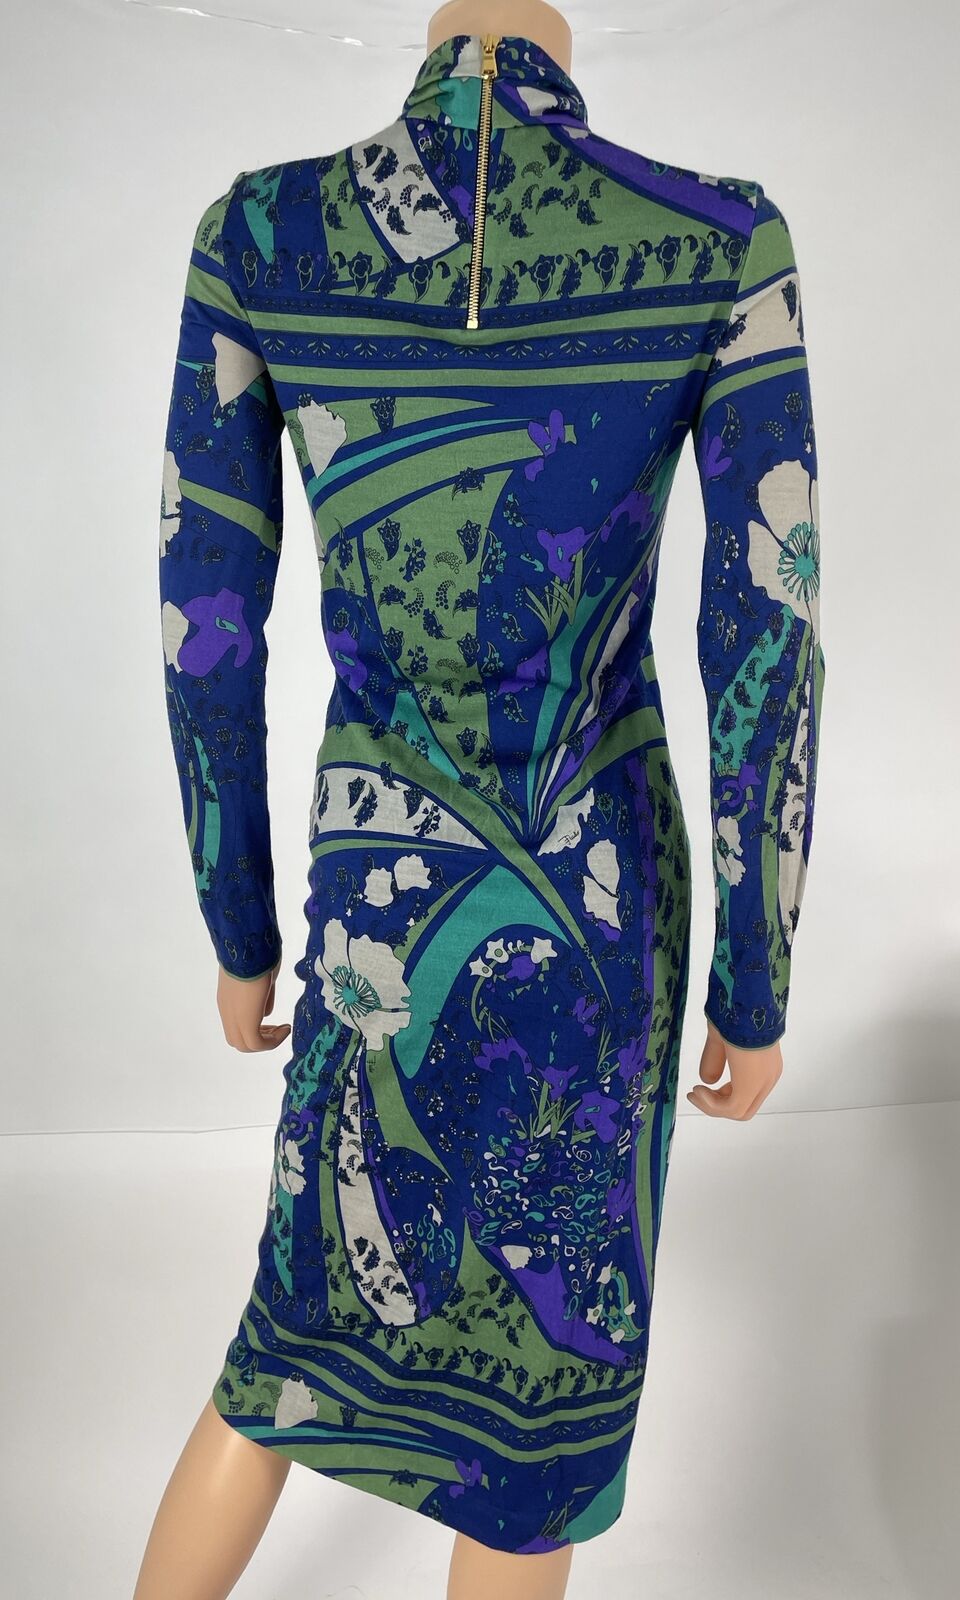 Emilio Pucci Blue Dress Swirl Abstract Long Sleev… - image 6